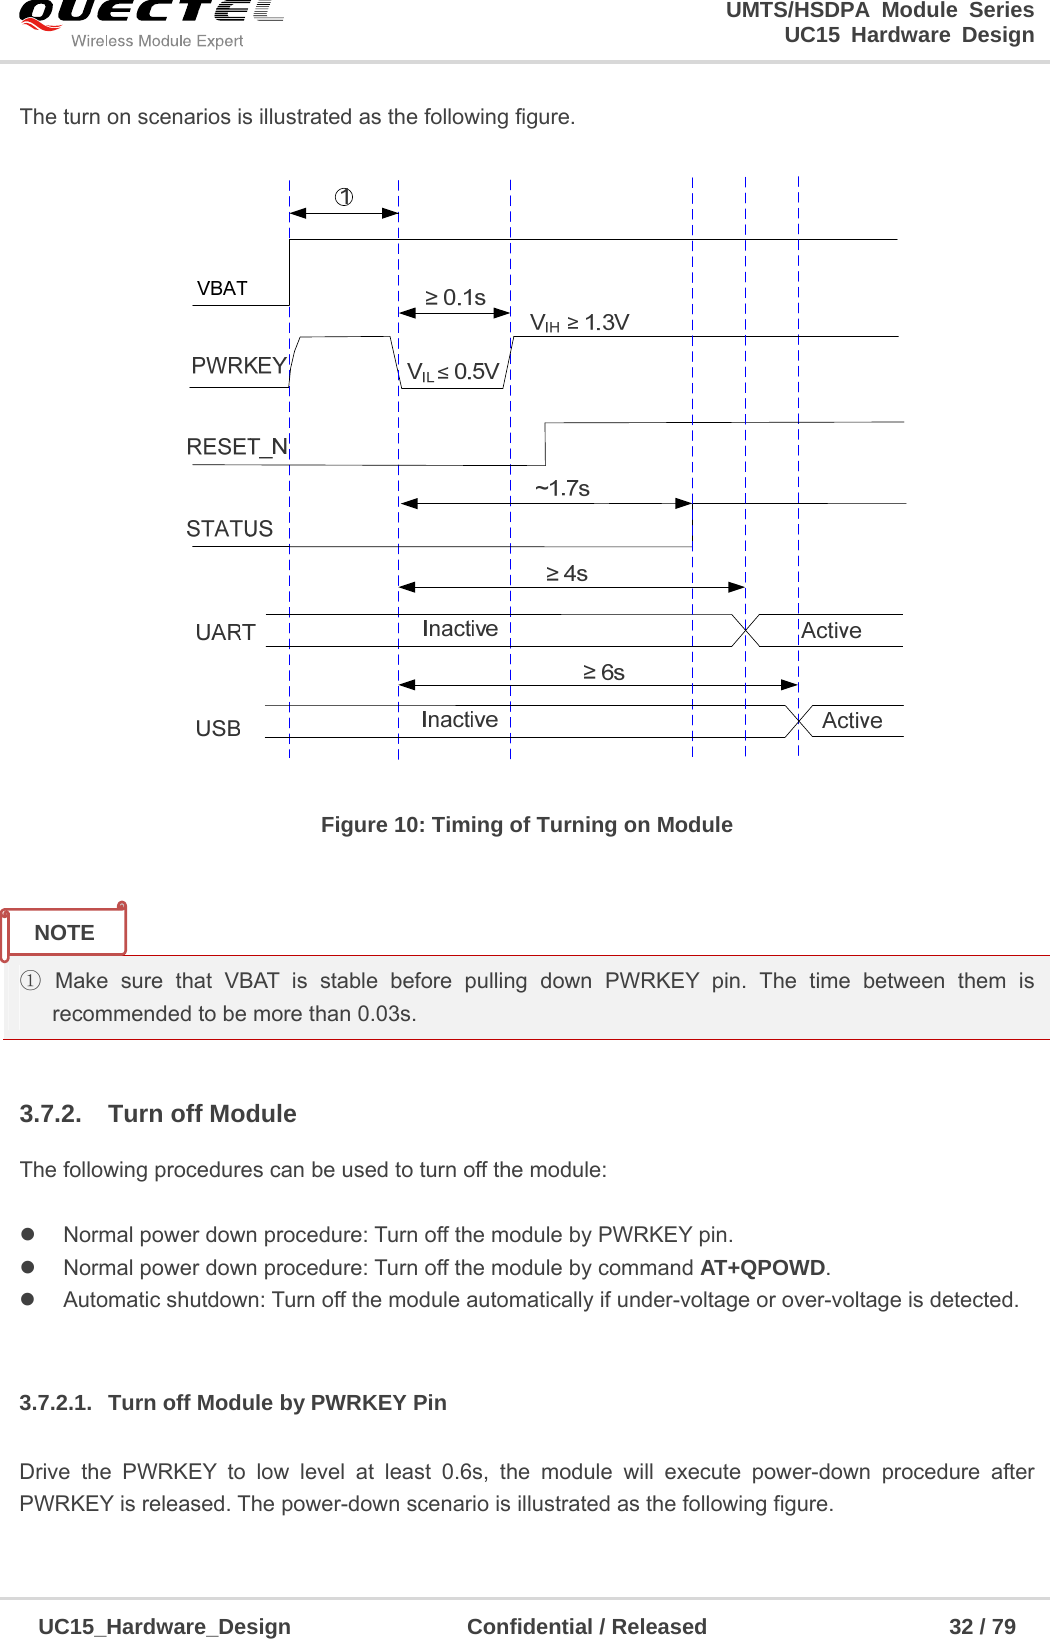                                                                        UMTS/HSDPA Module Series                                                                 UC15 Hardware Design  UC15_Hardware_Design                Confidential / Released                      32 / 79    The turn on scenarios is illustrated as the following figure.   Figure 10: Timing of Turning on Module   ① Make sure that VBAT is stable before pulling down PWRKEY pin. The time between them is recommended to be more than 0.03s.  3.7.2. Turn off Module The following procedures can be used to turn off the module:    Normal power down procedure: Turn off the module by PWRKEY pin.   Normal power down procedure: Turn off the module by command AT+QPOWD.   Automatic shutdown: Turn off the module automatically if under-voltage or over-voltage is detected.  3.7.2.1.  Turn off Module by PWRKEY Pin  Drive the PWRKEY to low level at least 0.6s, the module will execute power-down procedure after PWRKEY is released. The power-down scenario is illustrated as the following figure. NOTE 